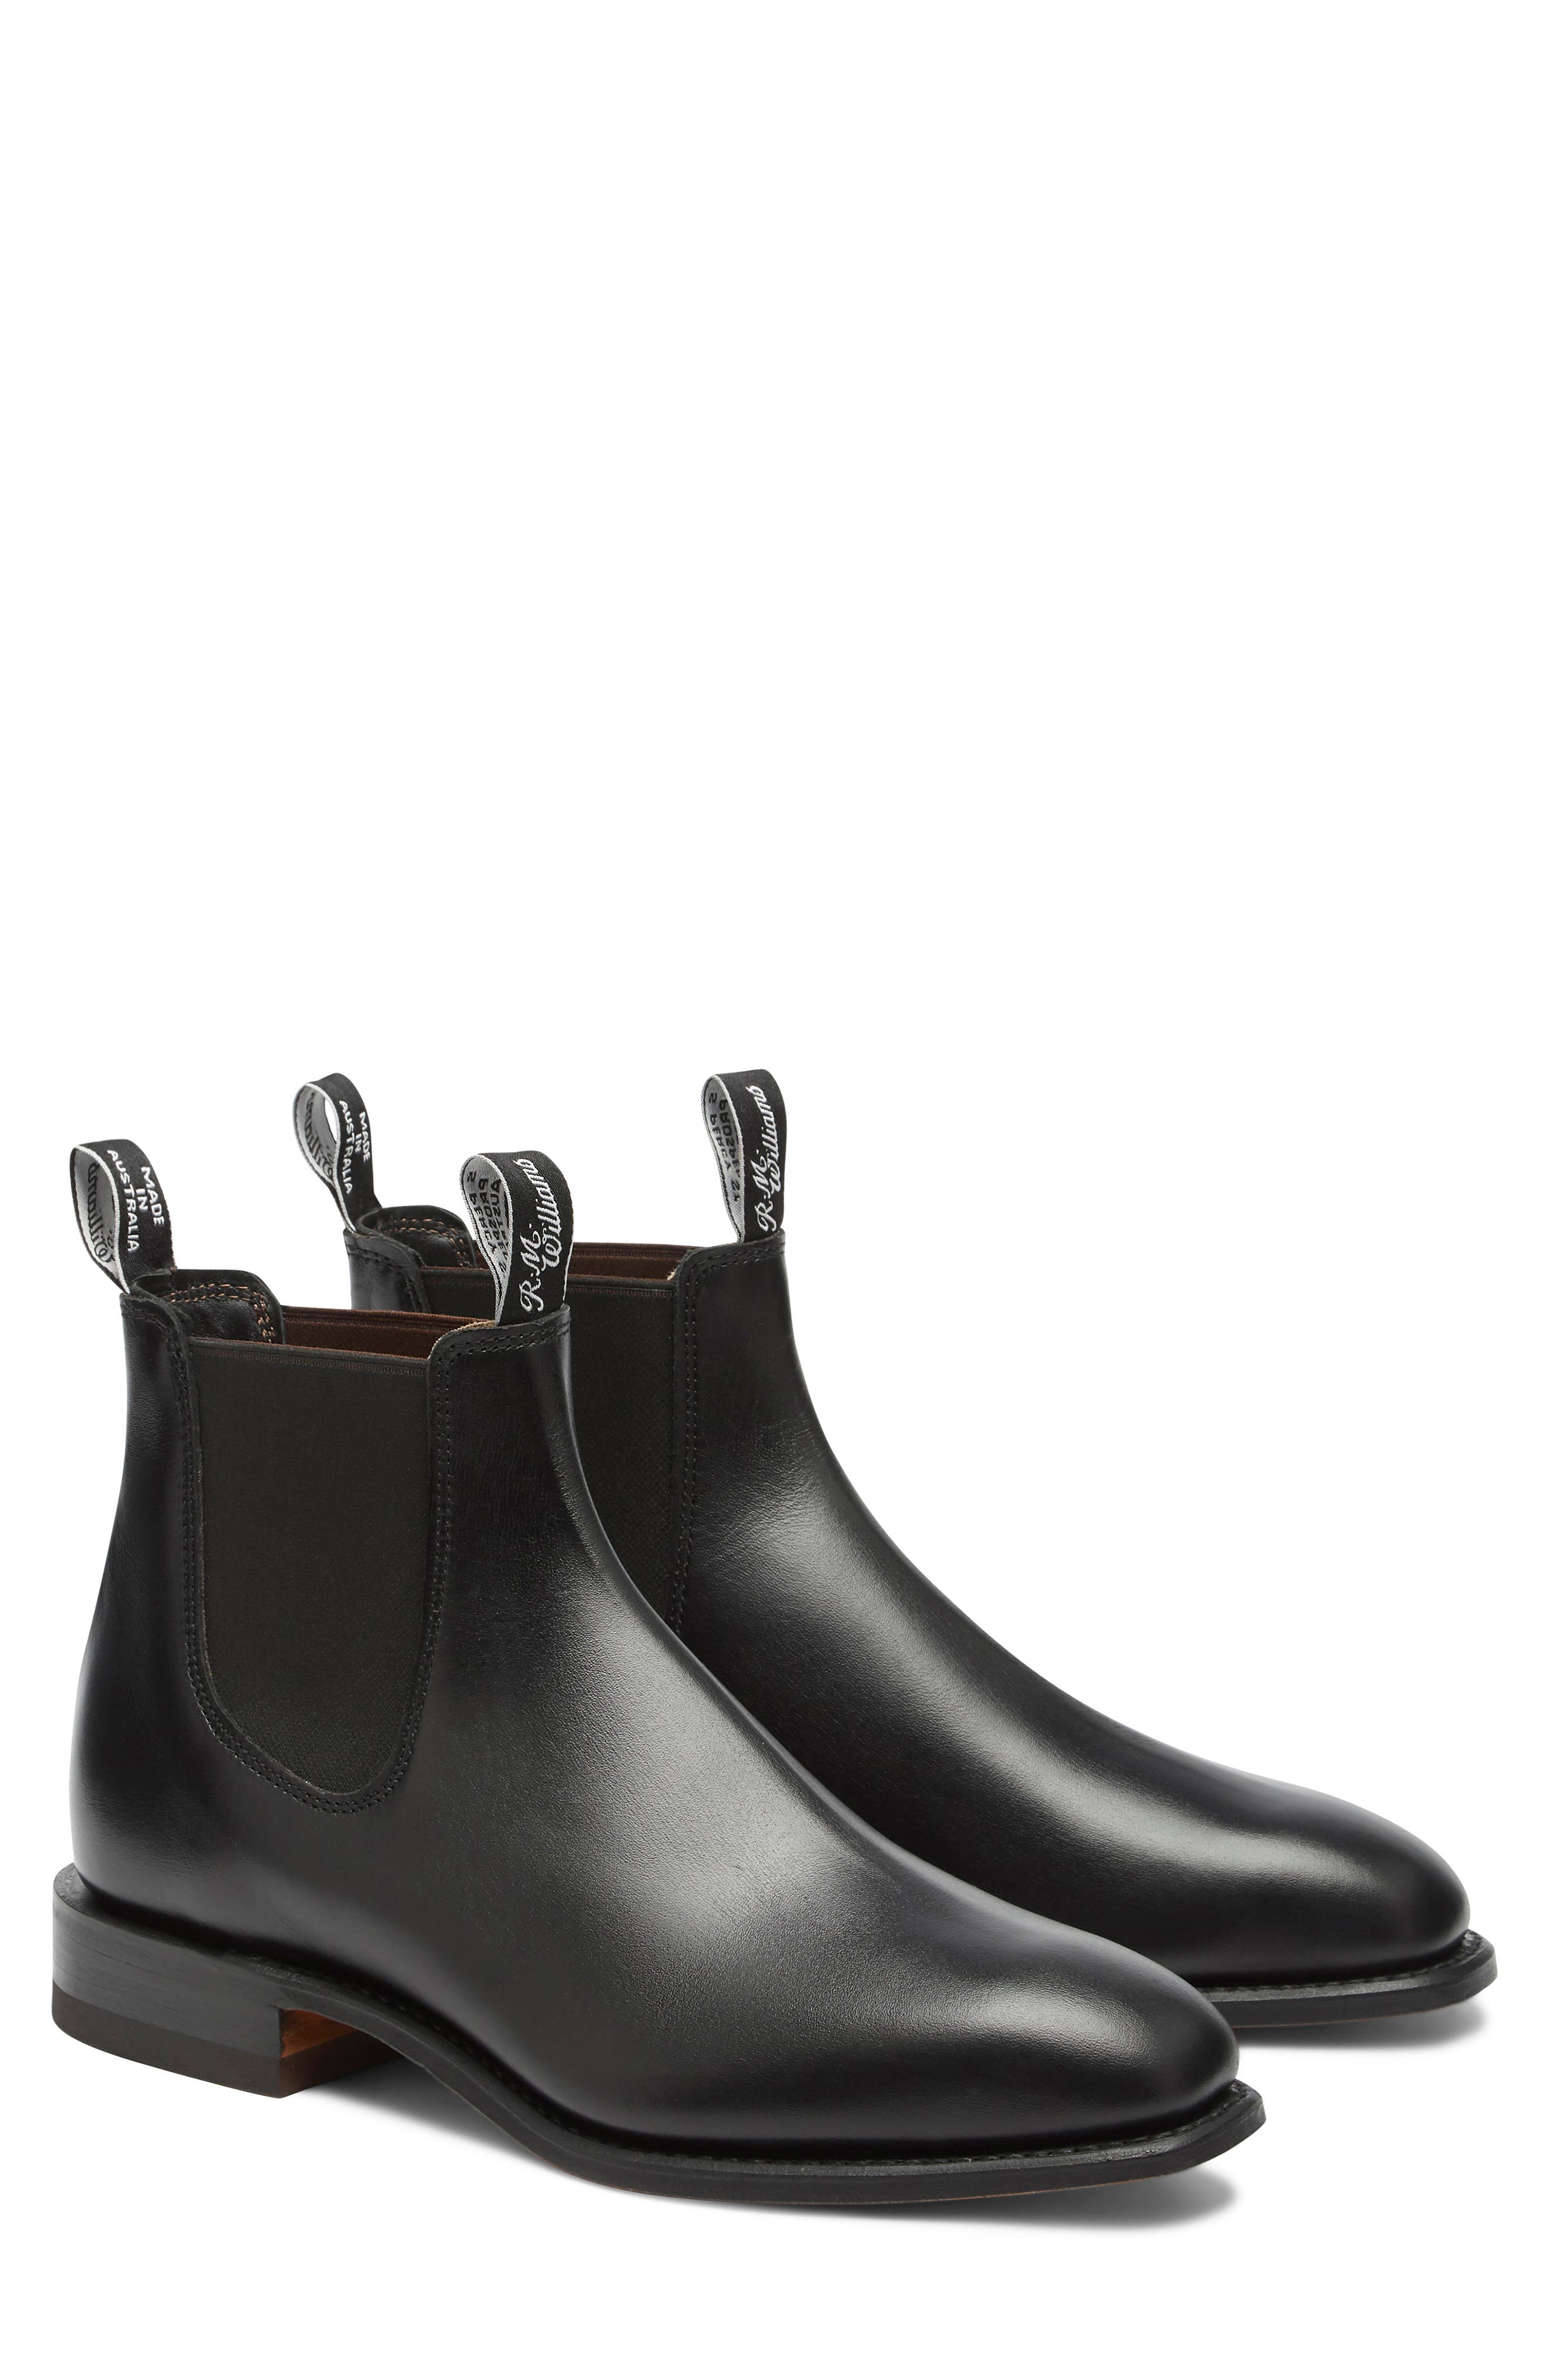 5SOS STYLE GUIDE  Black leather chelsea boots, Leather chelsea